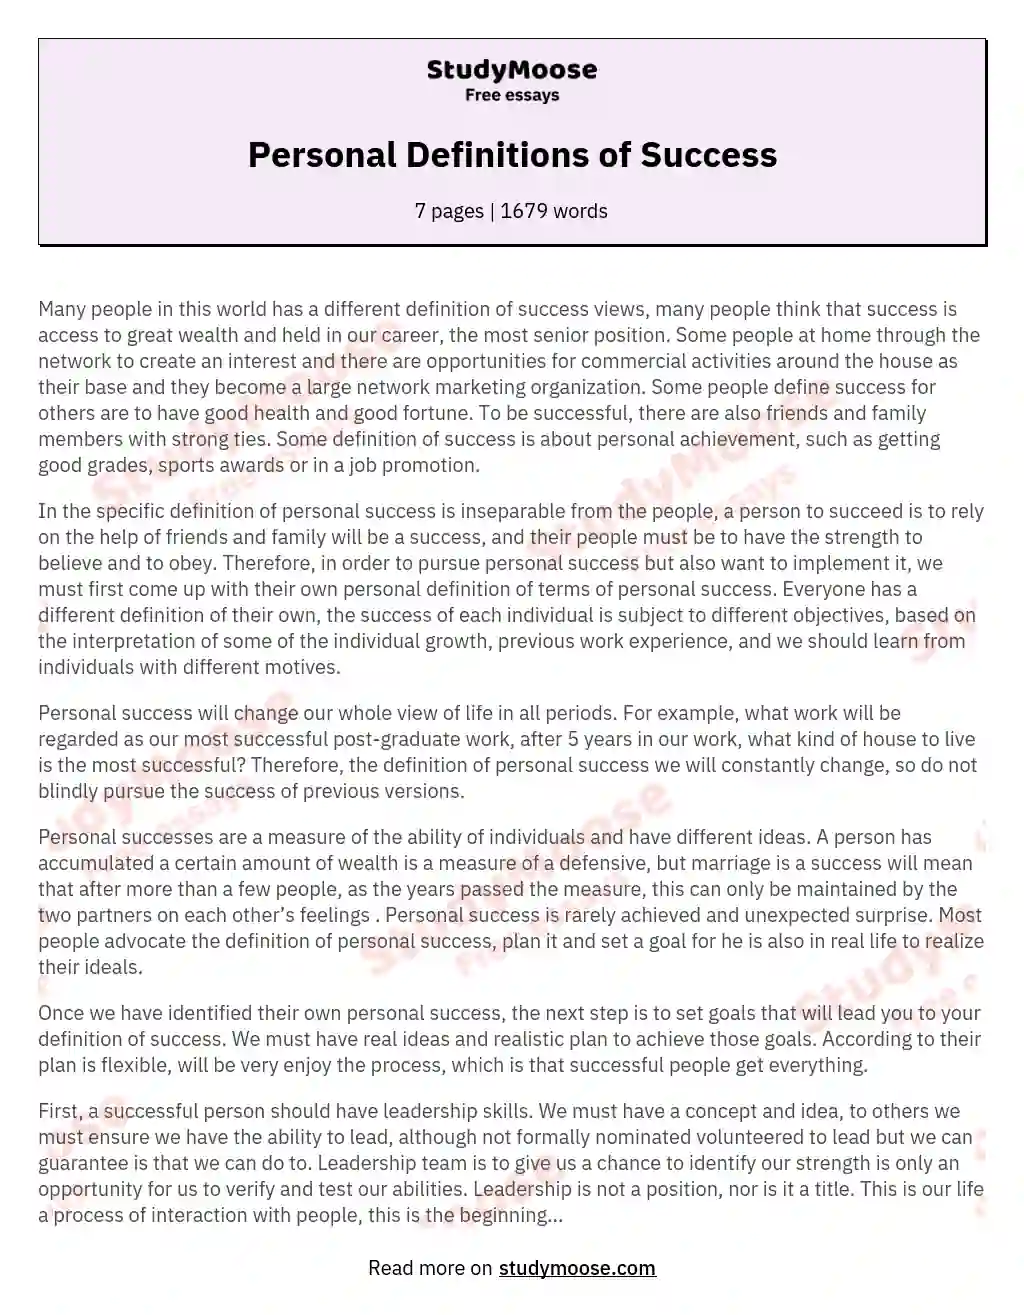 Personal Definitions of Success essay